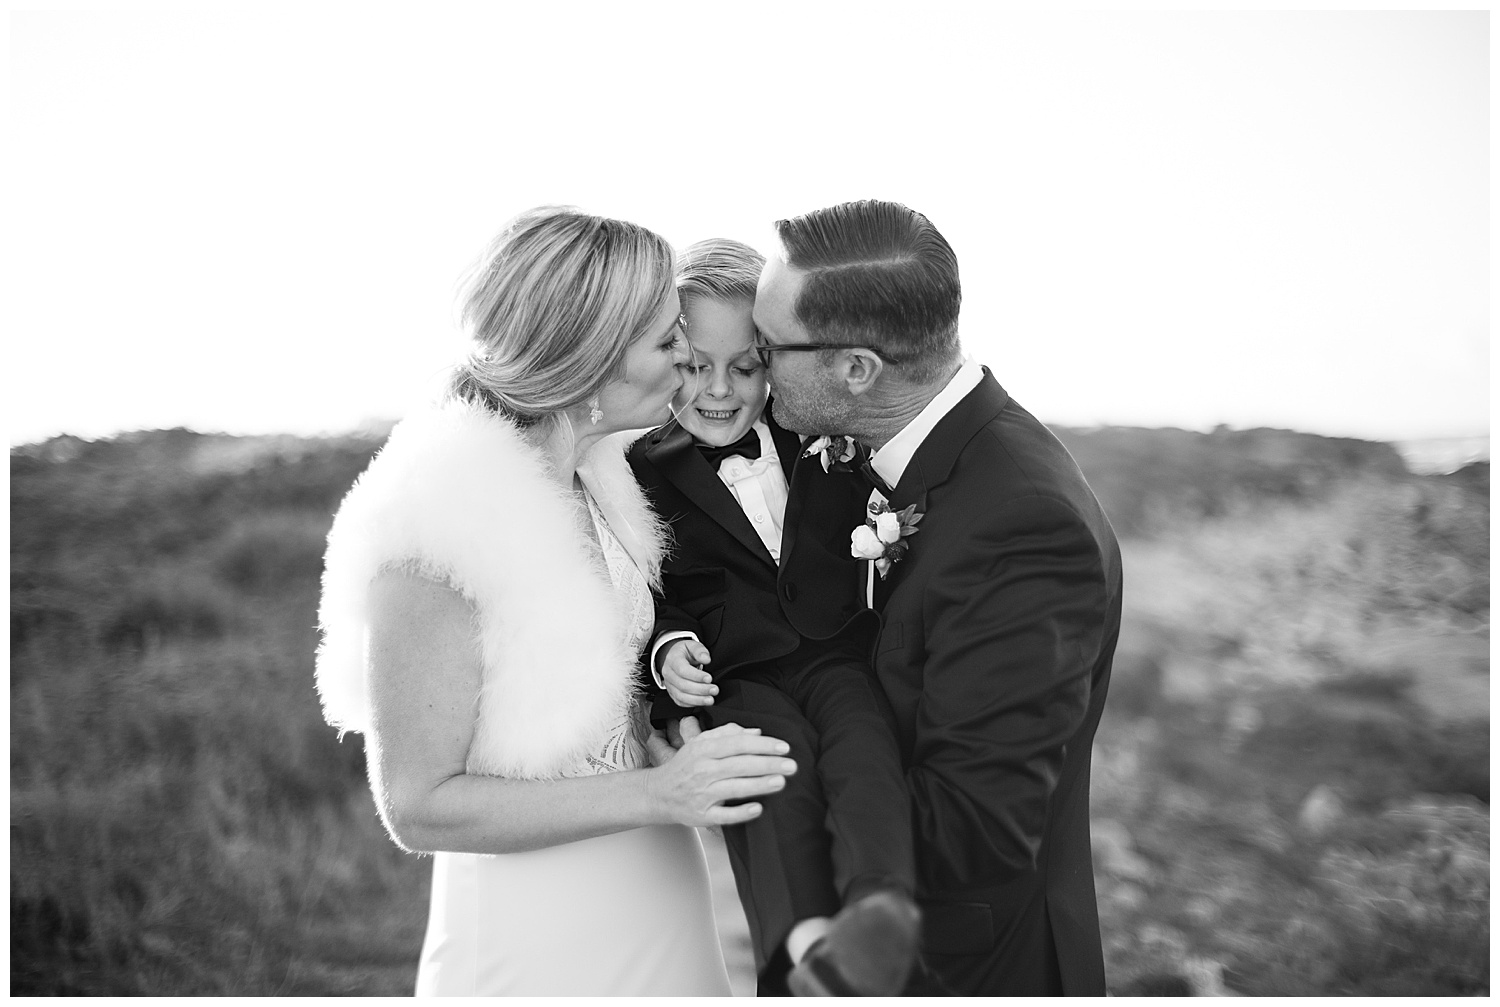 black and white photo of the bride and groom kissing their son on his cheeks by film photographer AGS Photo Art